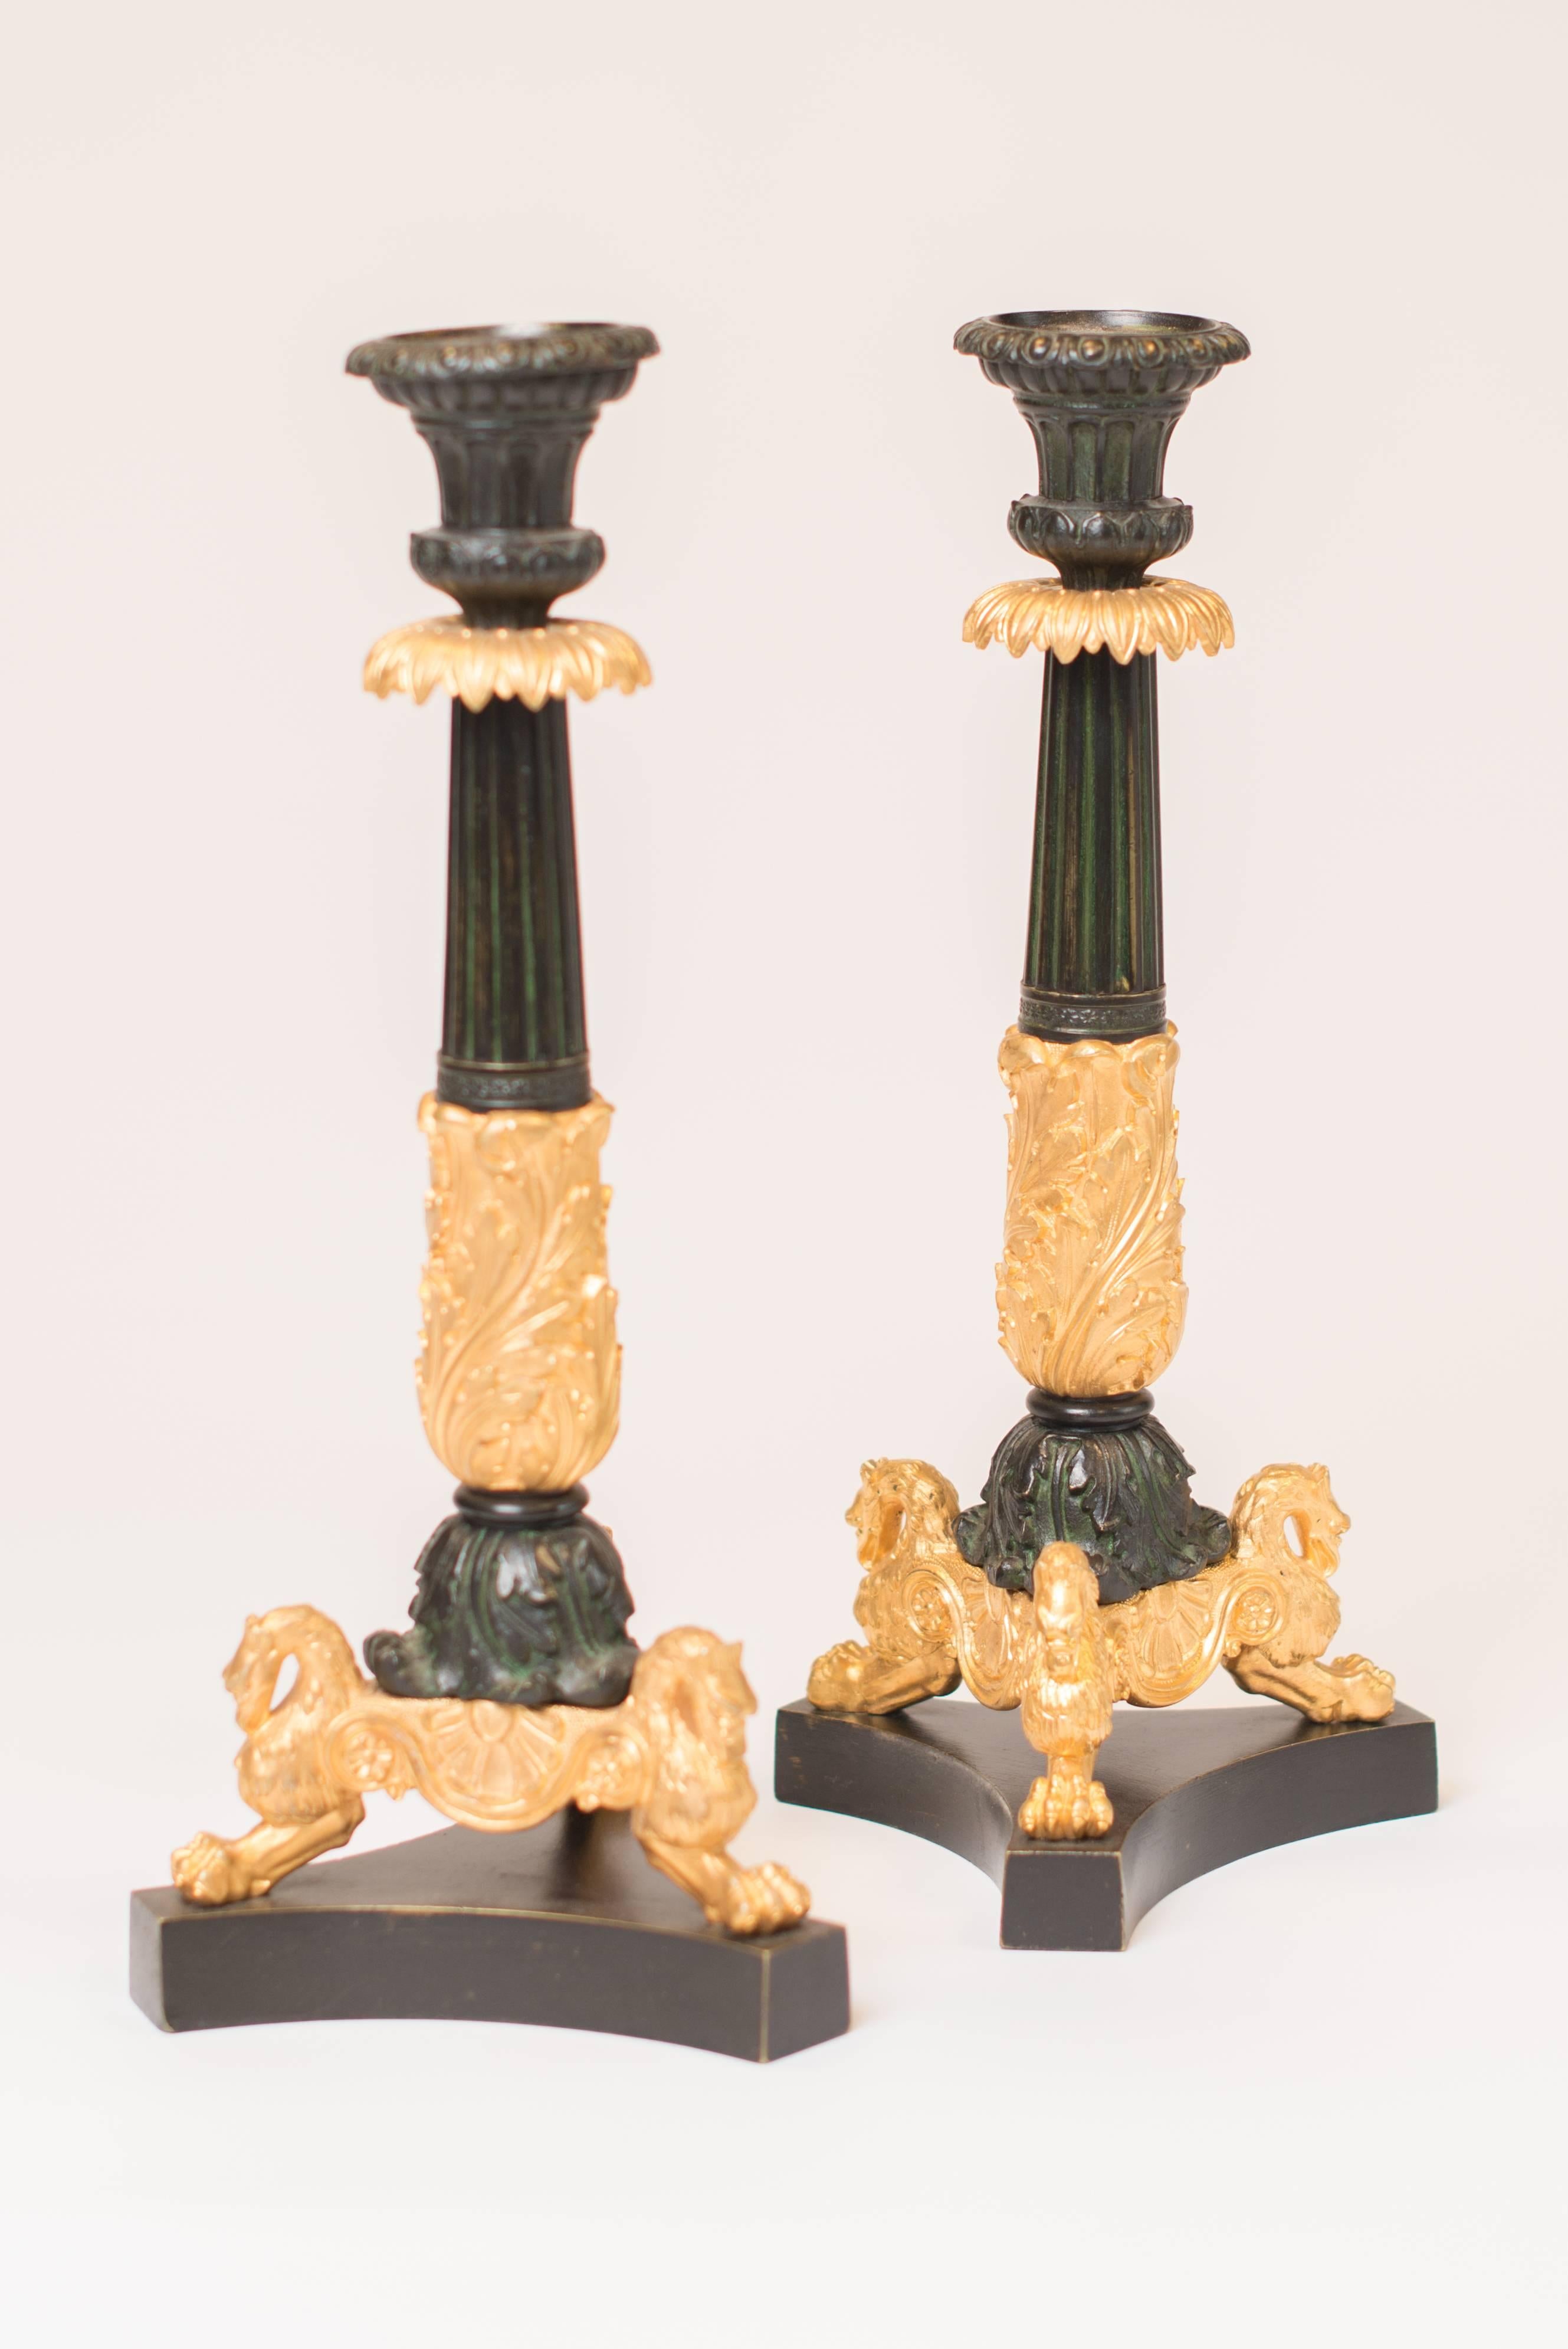 This pair of French Louis Philippe gilt bronze and patinated candlesticks do have finely finished decoration. Made in France, circa 1850
Each candlestick with a plain triangular shaped plinth, three gilt claw feet with griffin finials, foliate